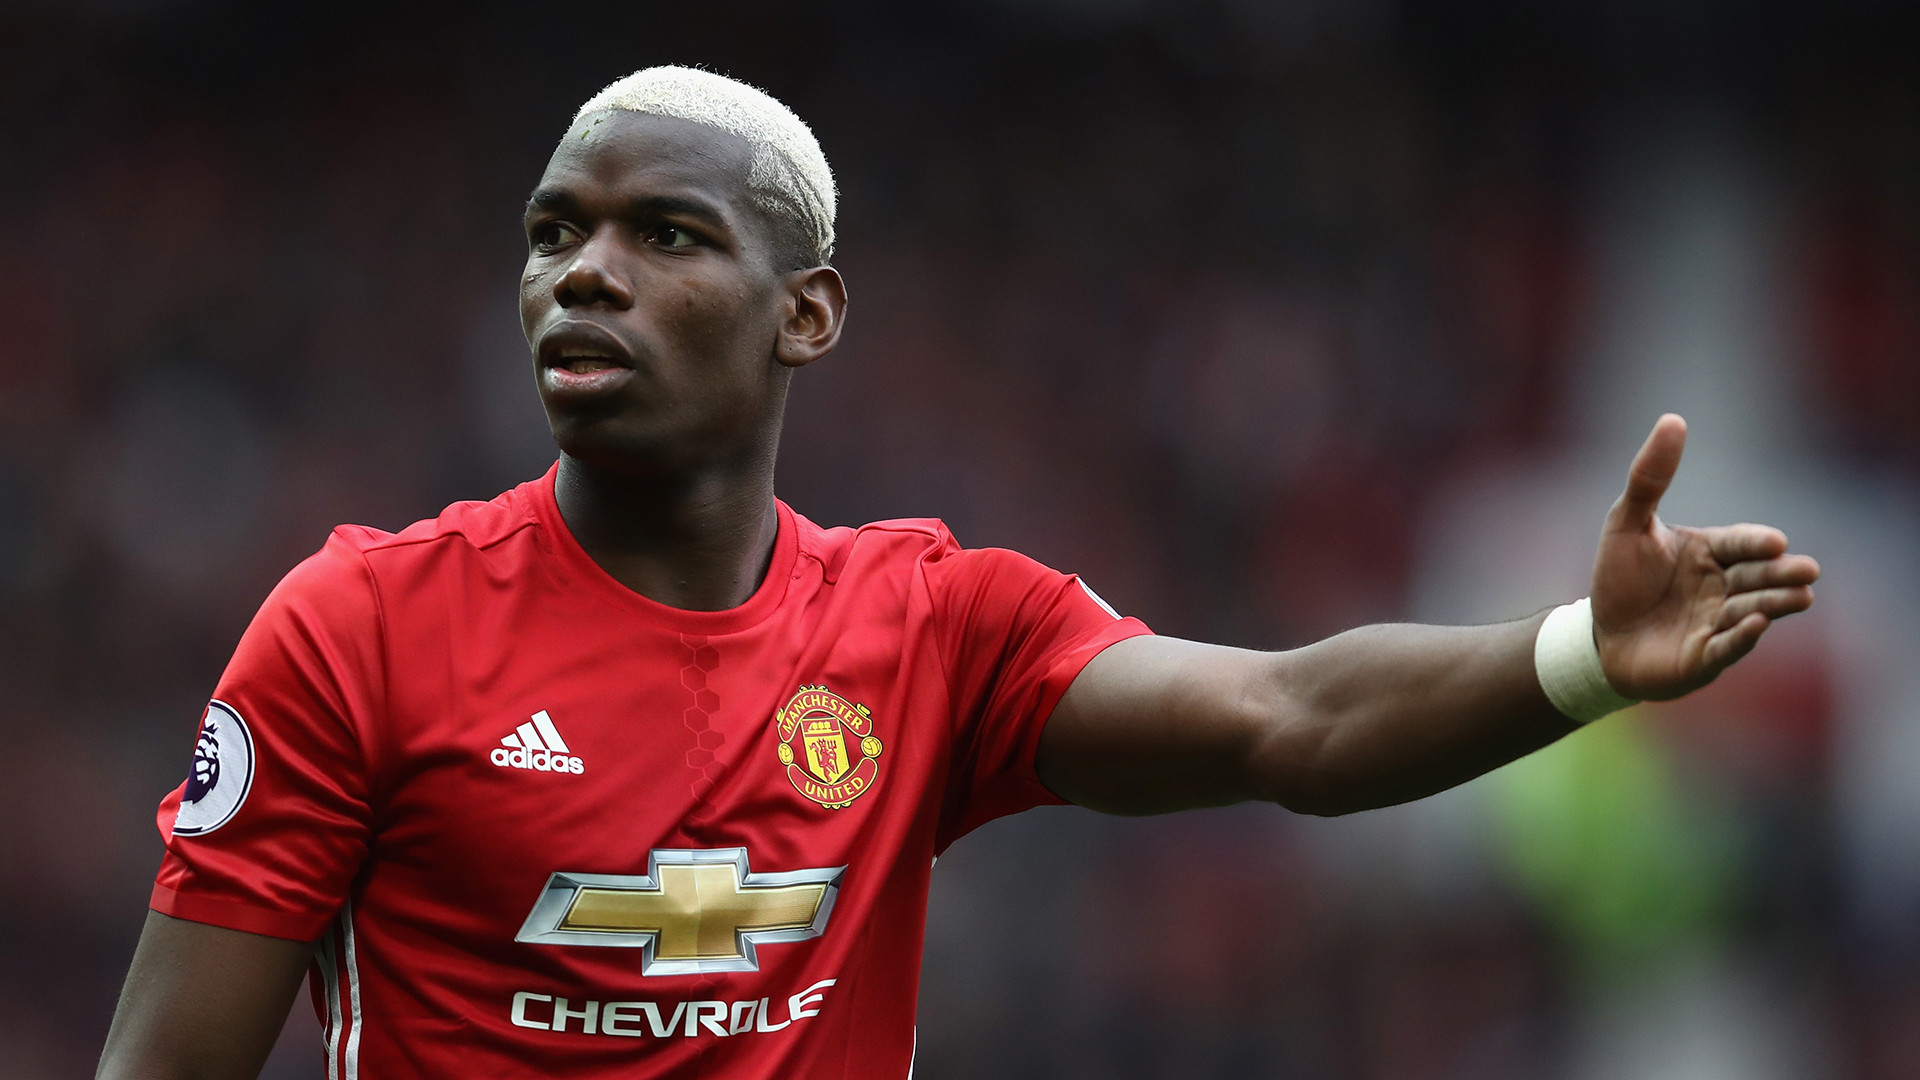 1920x1080 Paul Pogba has confirmed his status as the new icon of United, with the  Â£89m midfielder establishing himself as the Premier League's leading shirt  seller.